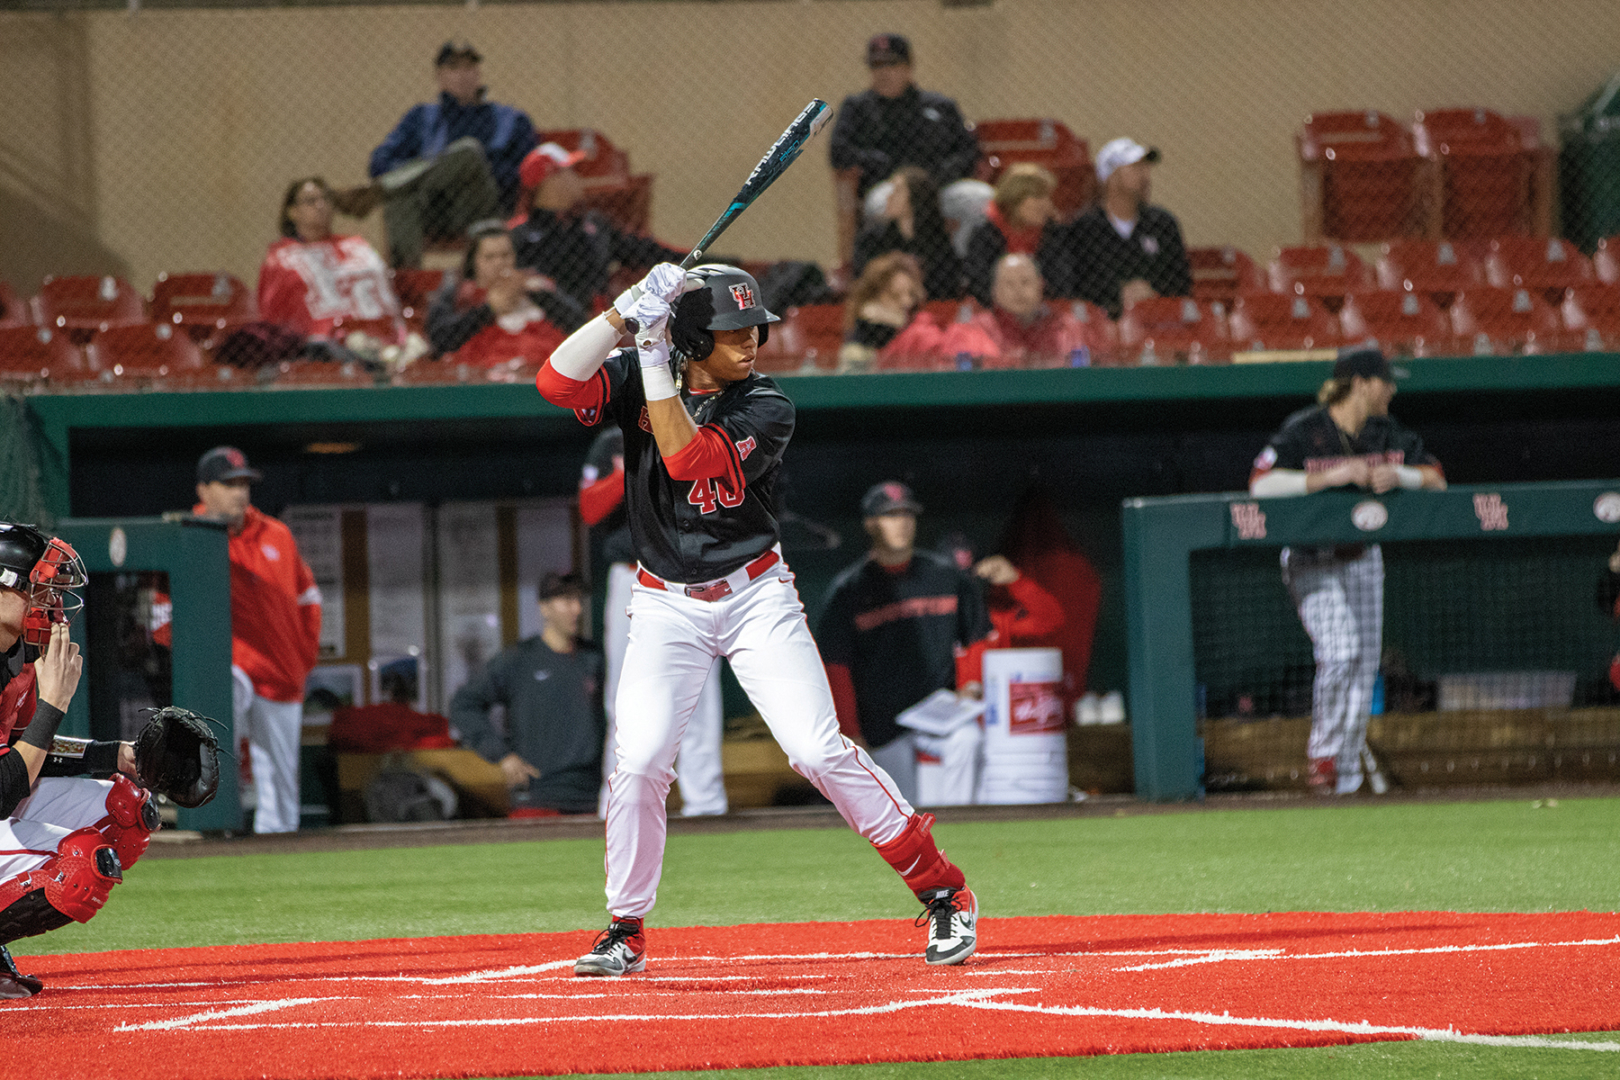 Junior first baseman Ryan Hernandez’s solo shot in the ninth inning helped the Cougars to a 3-1 win over UNLV on Tuesday in Las Vegas. | Jhair Romero/The Cougar